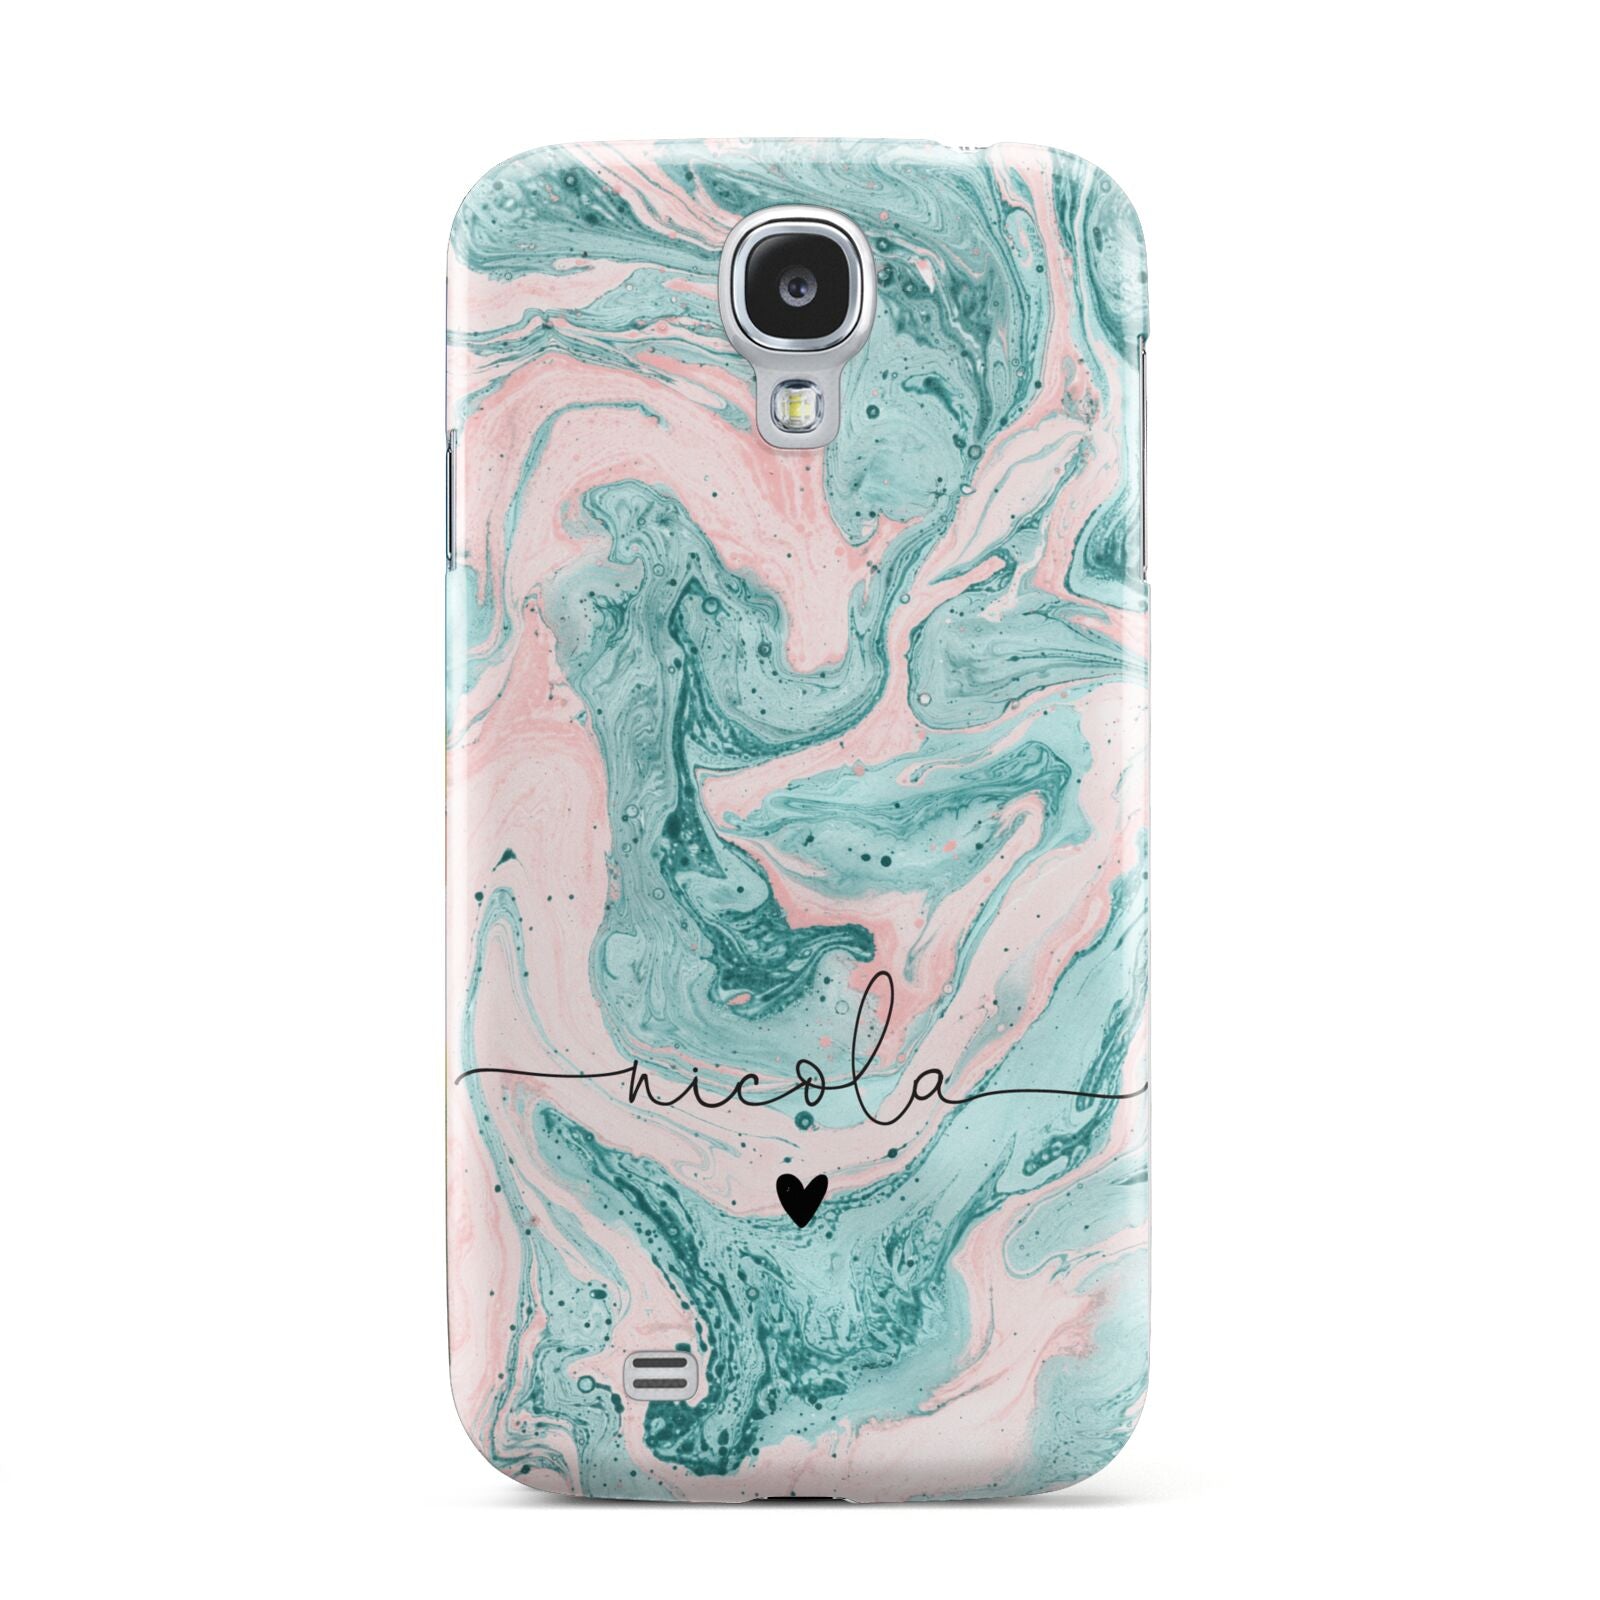 Personalised Name Green Swirl Marble Samsung Galaxy S4 Case